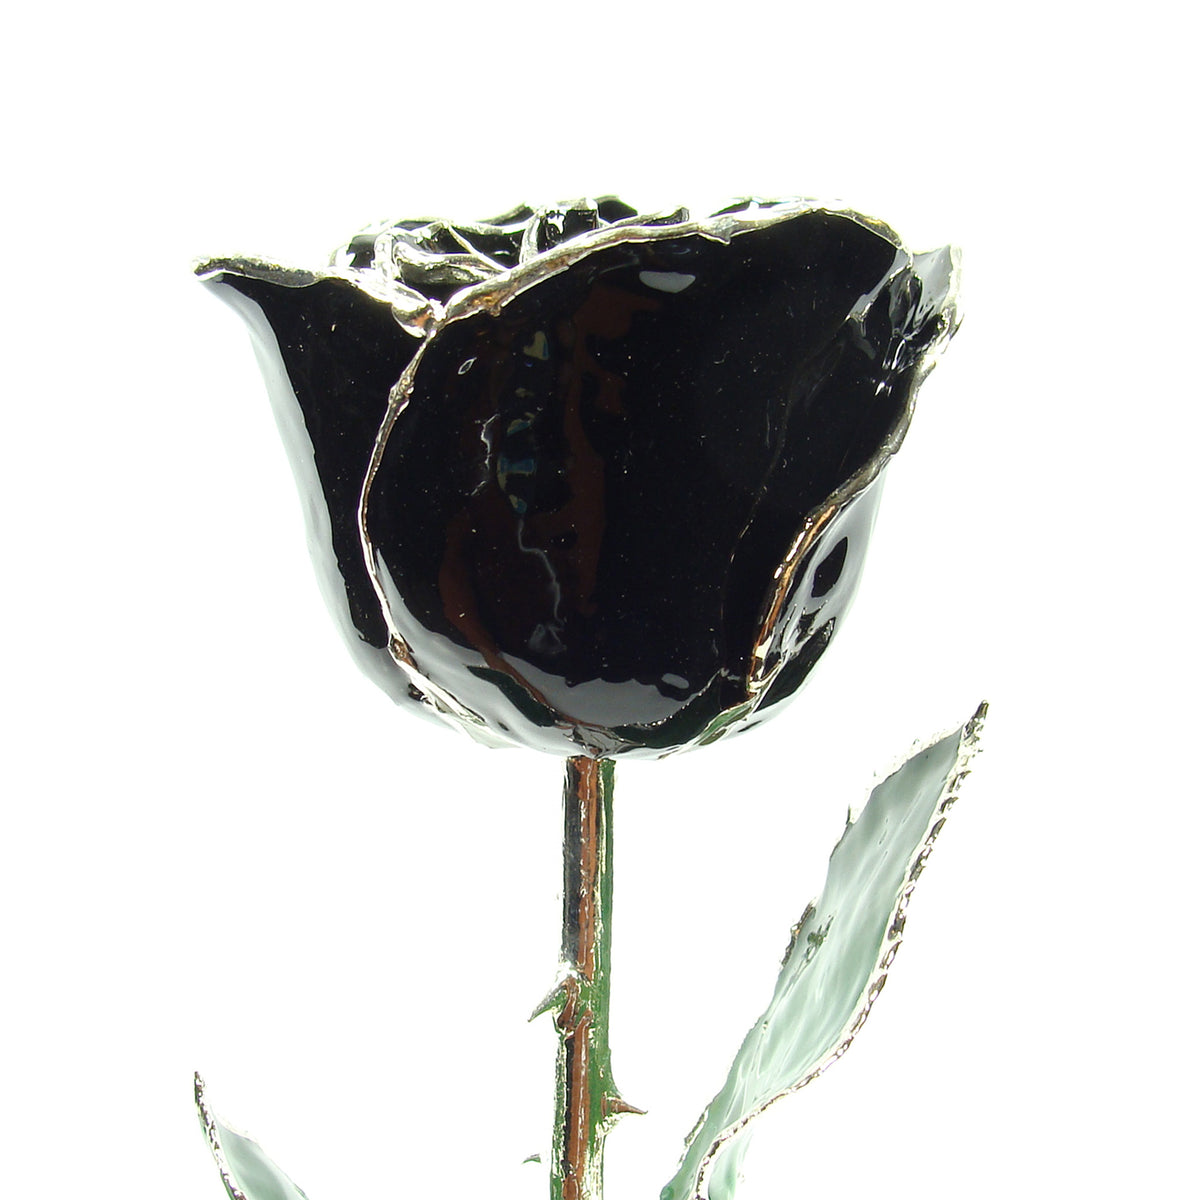 Silver Trimmed Forever Rose with Black Petals. View of Stem, Leaves, and Rose Petals and Showing Detail of Silver Trim